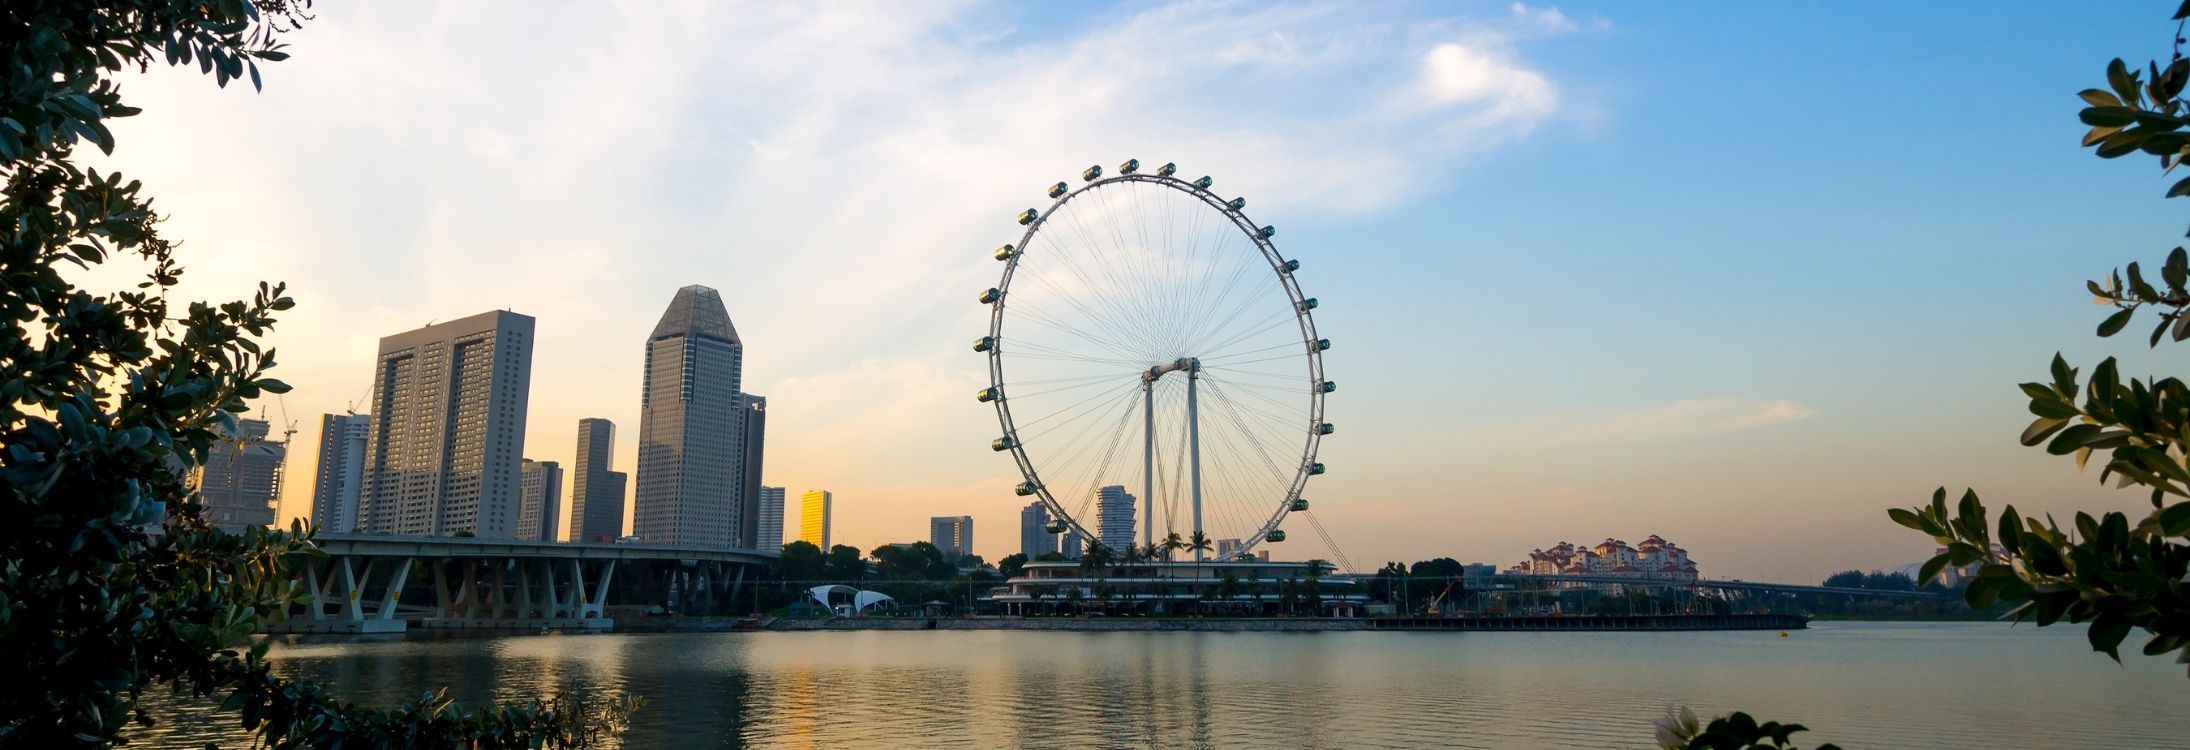 Singapore Flyer, The Ultimate Experience